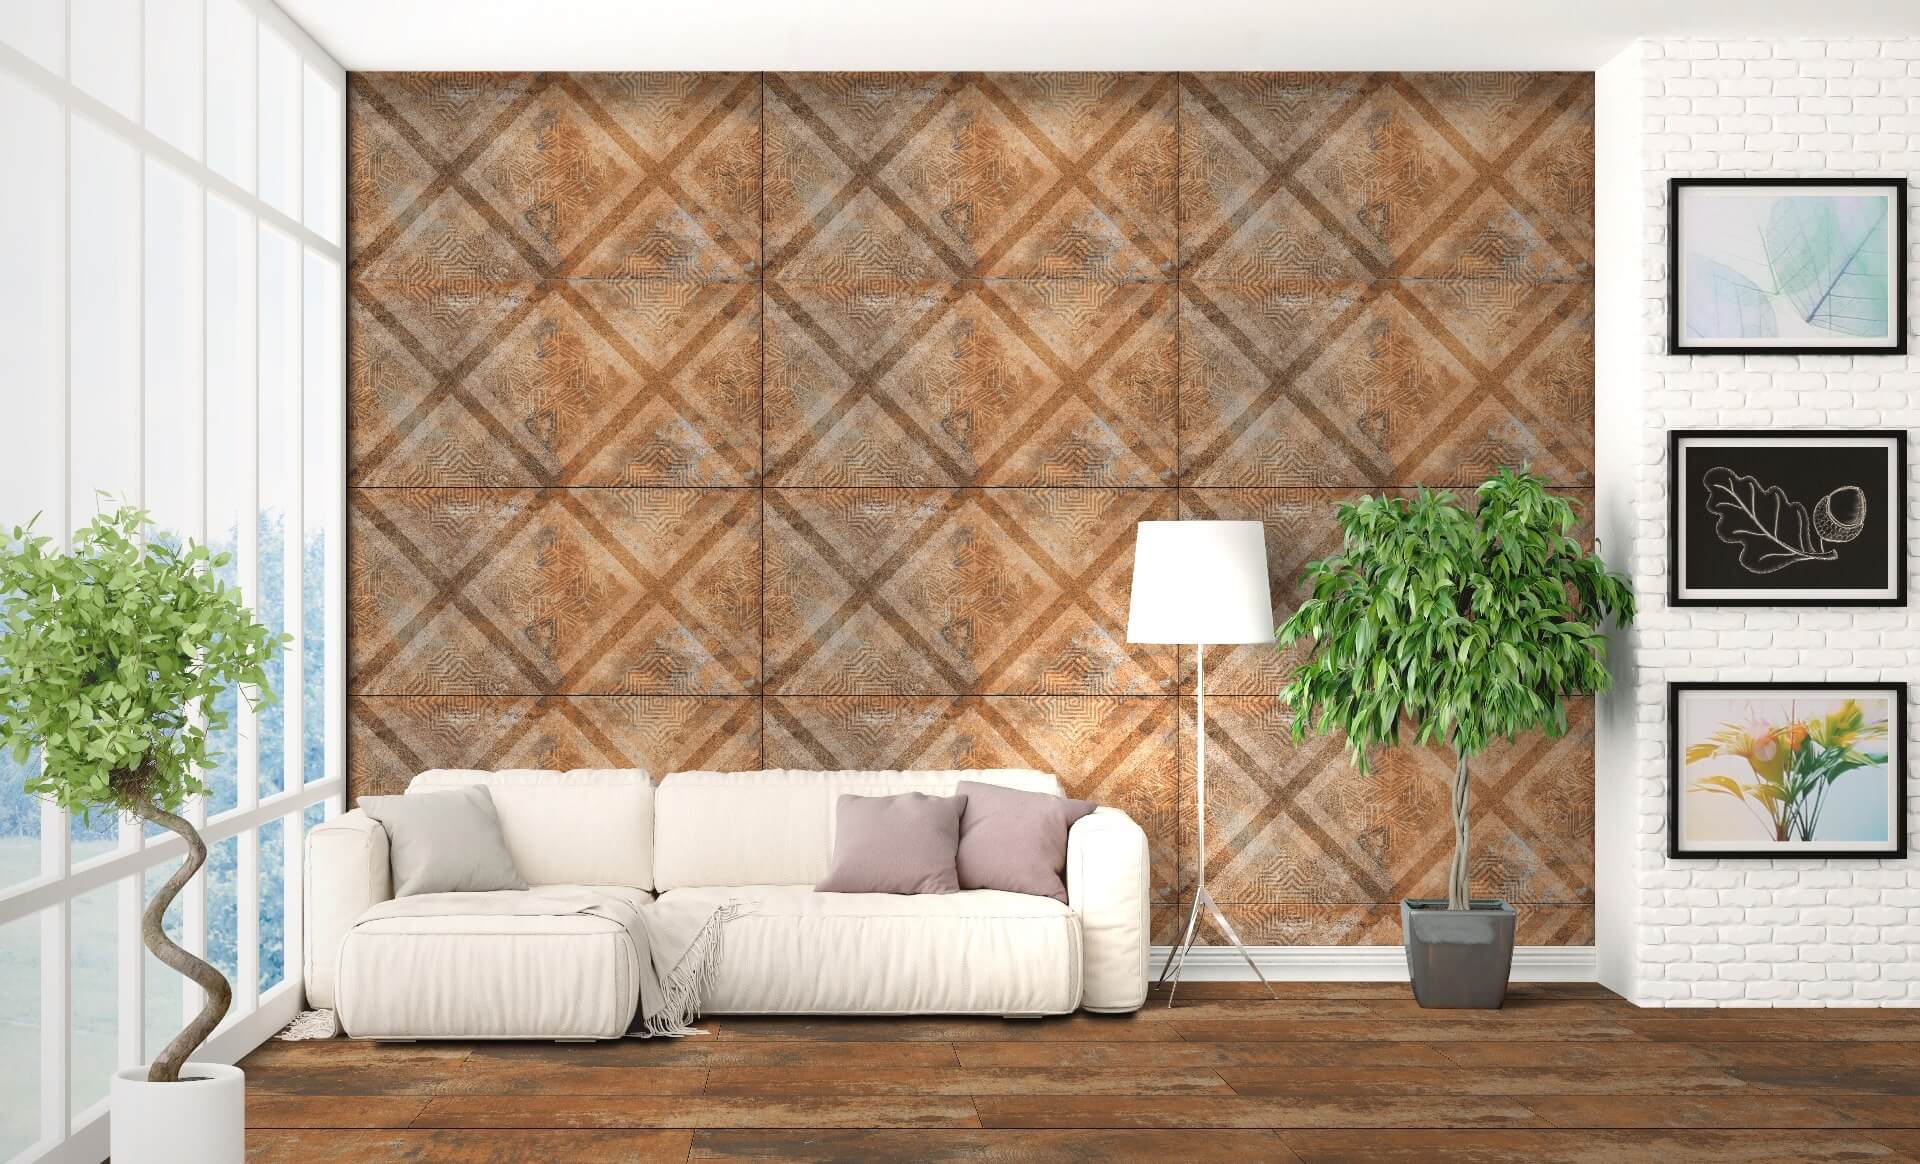 Office Tiles for Accent Tiles